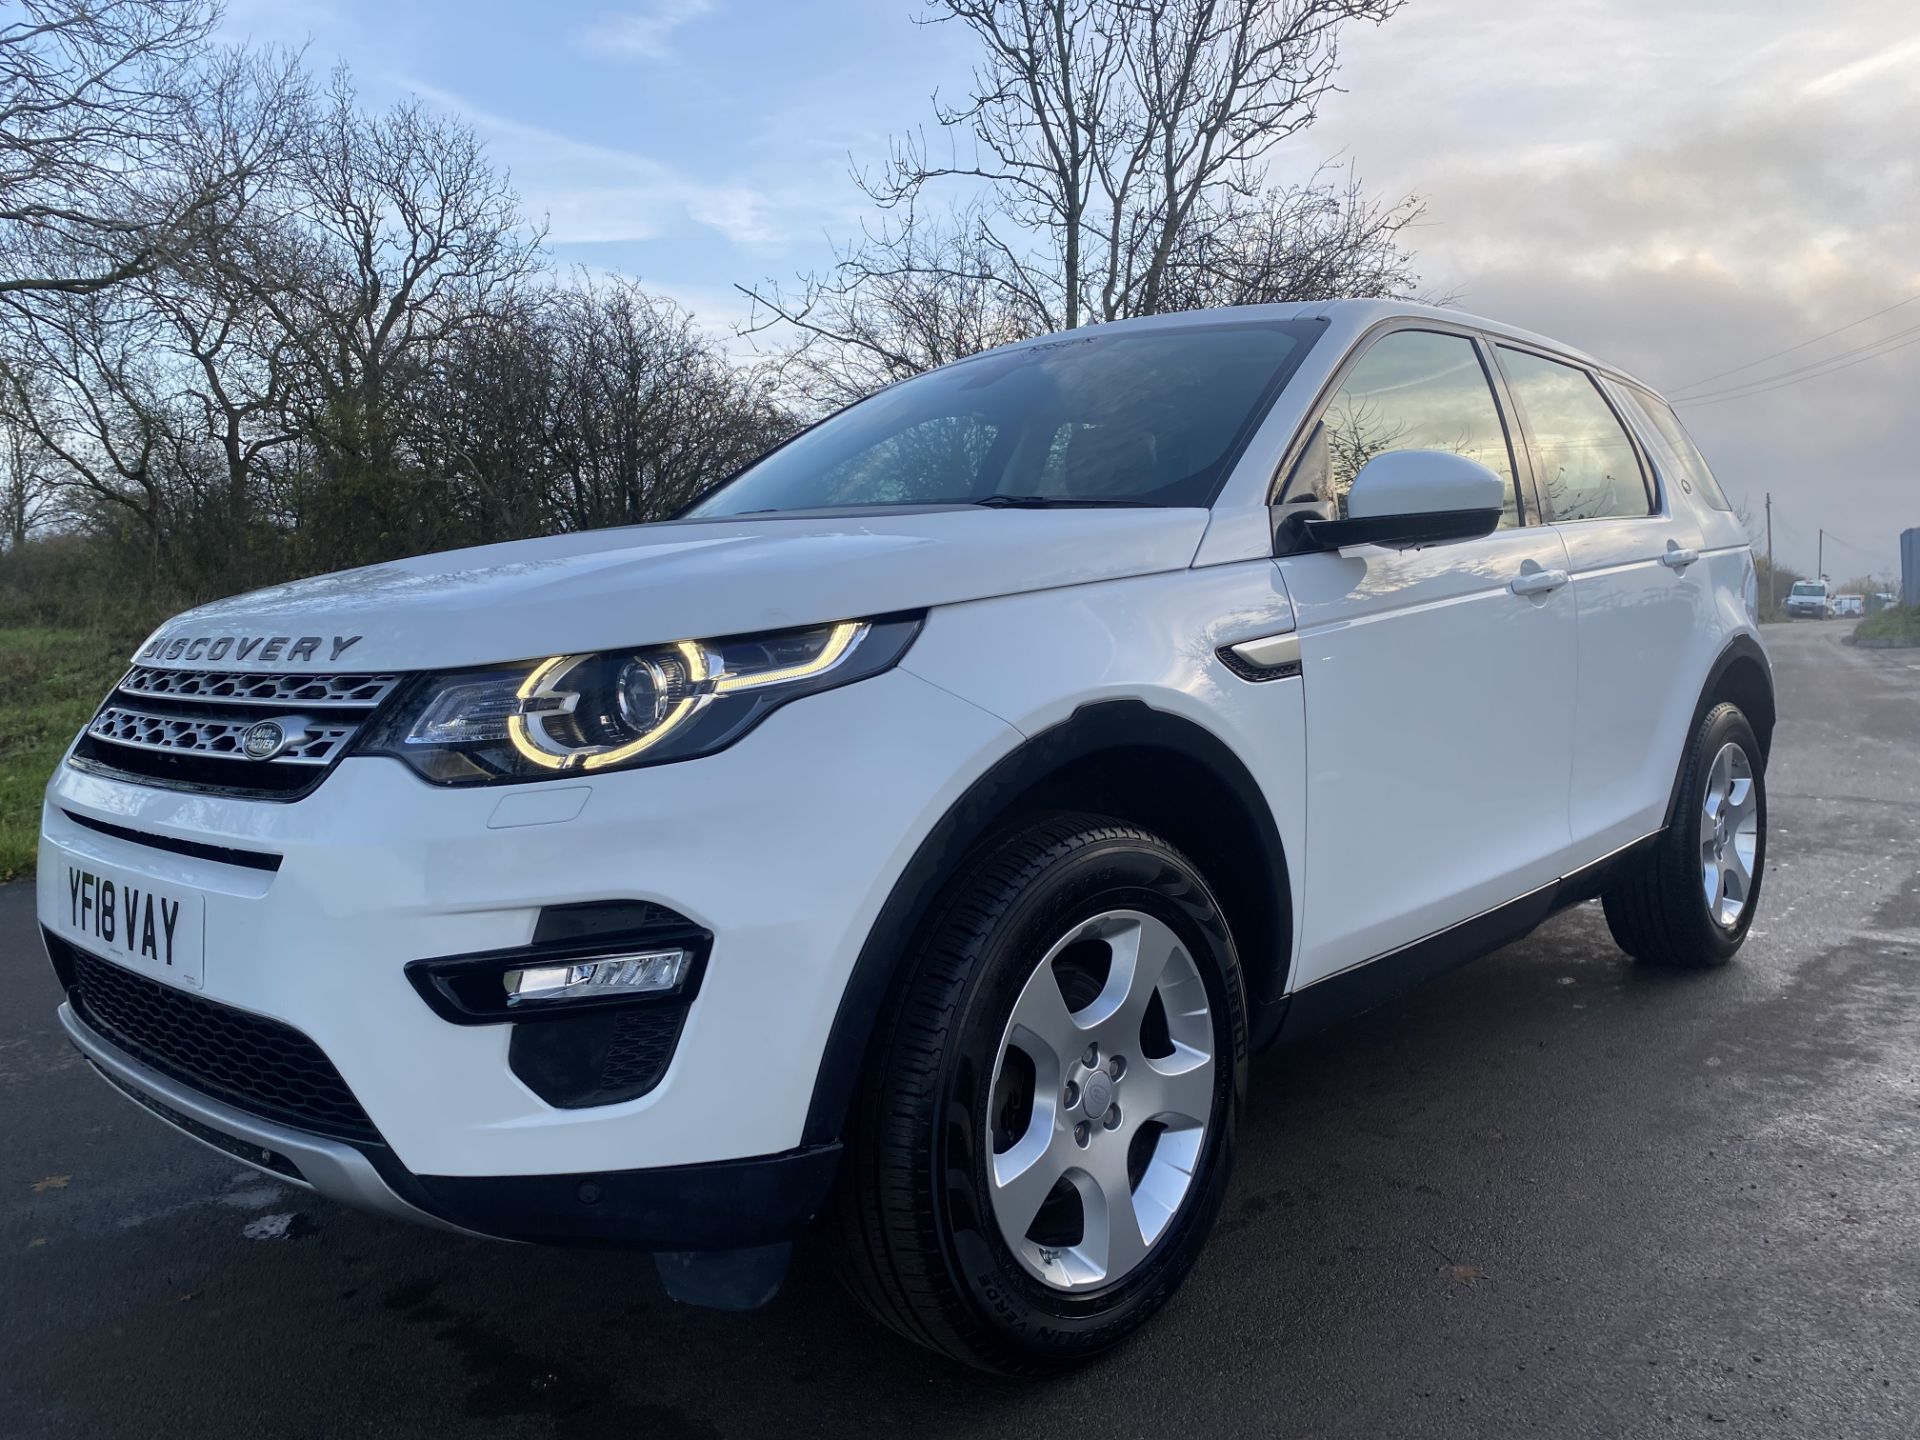 (ON SALE) LANDROVER DISCOVERY SPORT "HSE" 18 REG - 1 OWNER - LEATHER PANORAMIC ROOF - FULLY LOADED - - Image 5 of 37